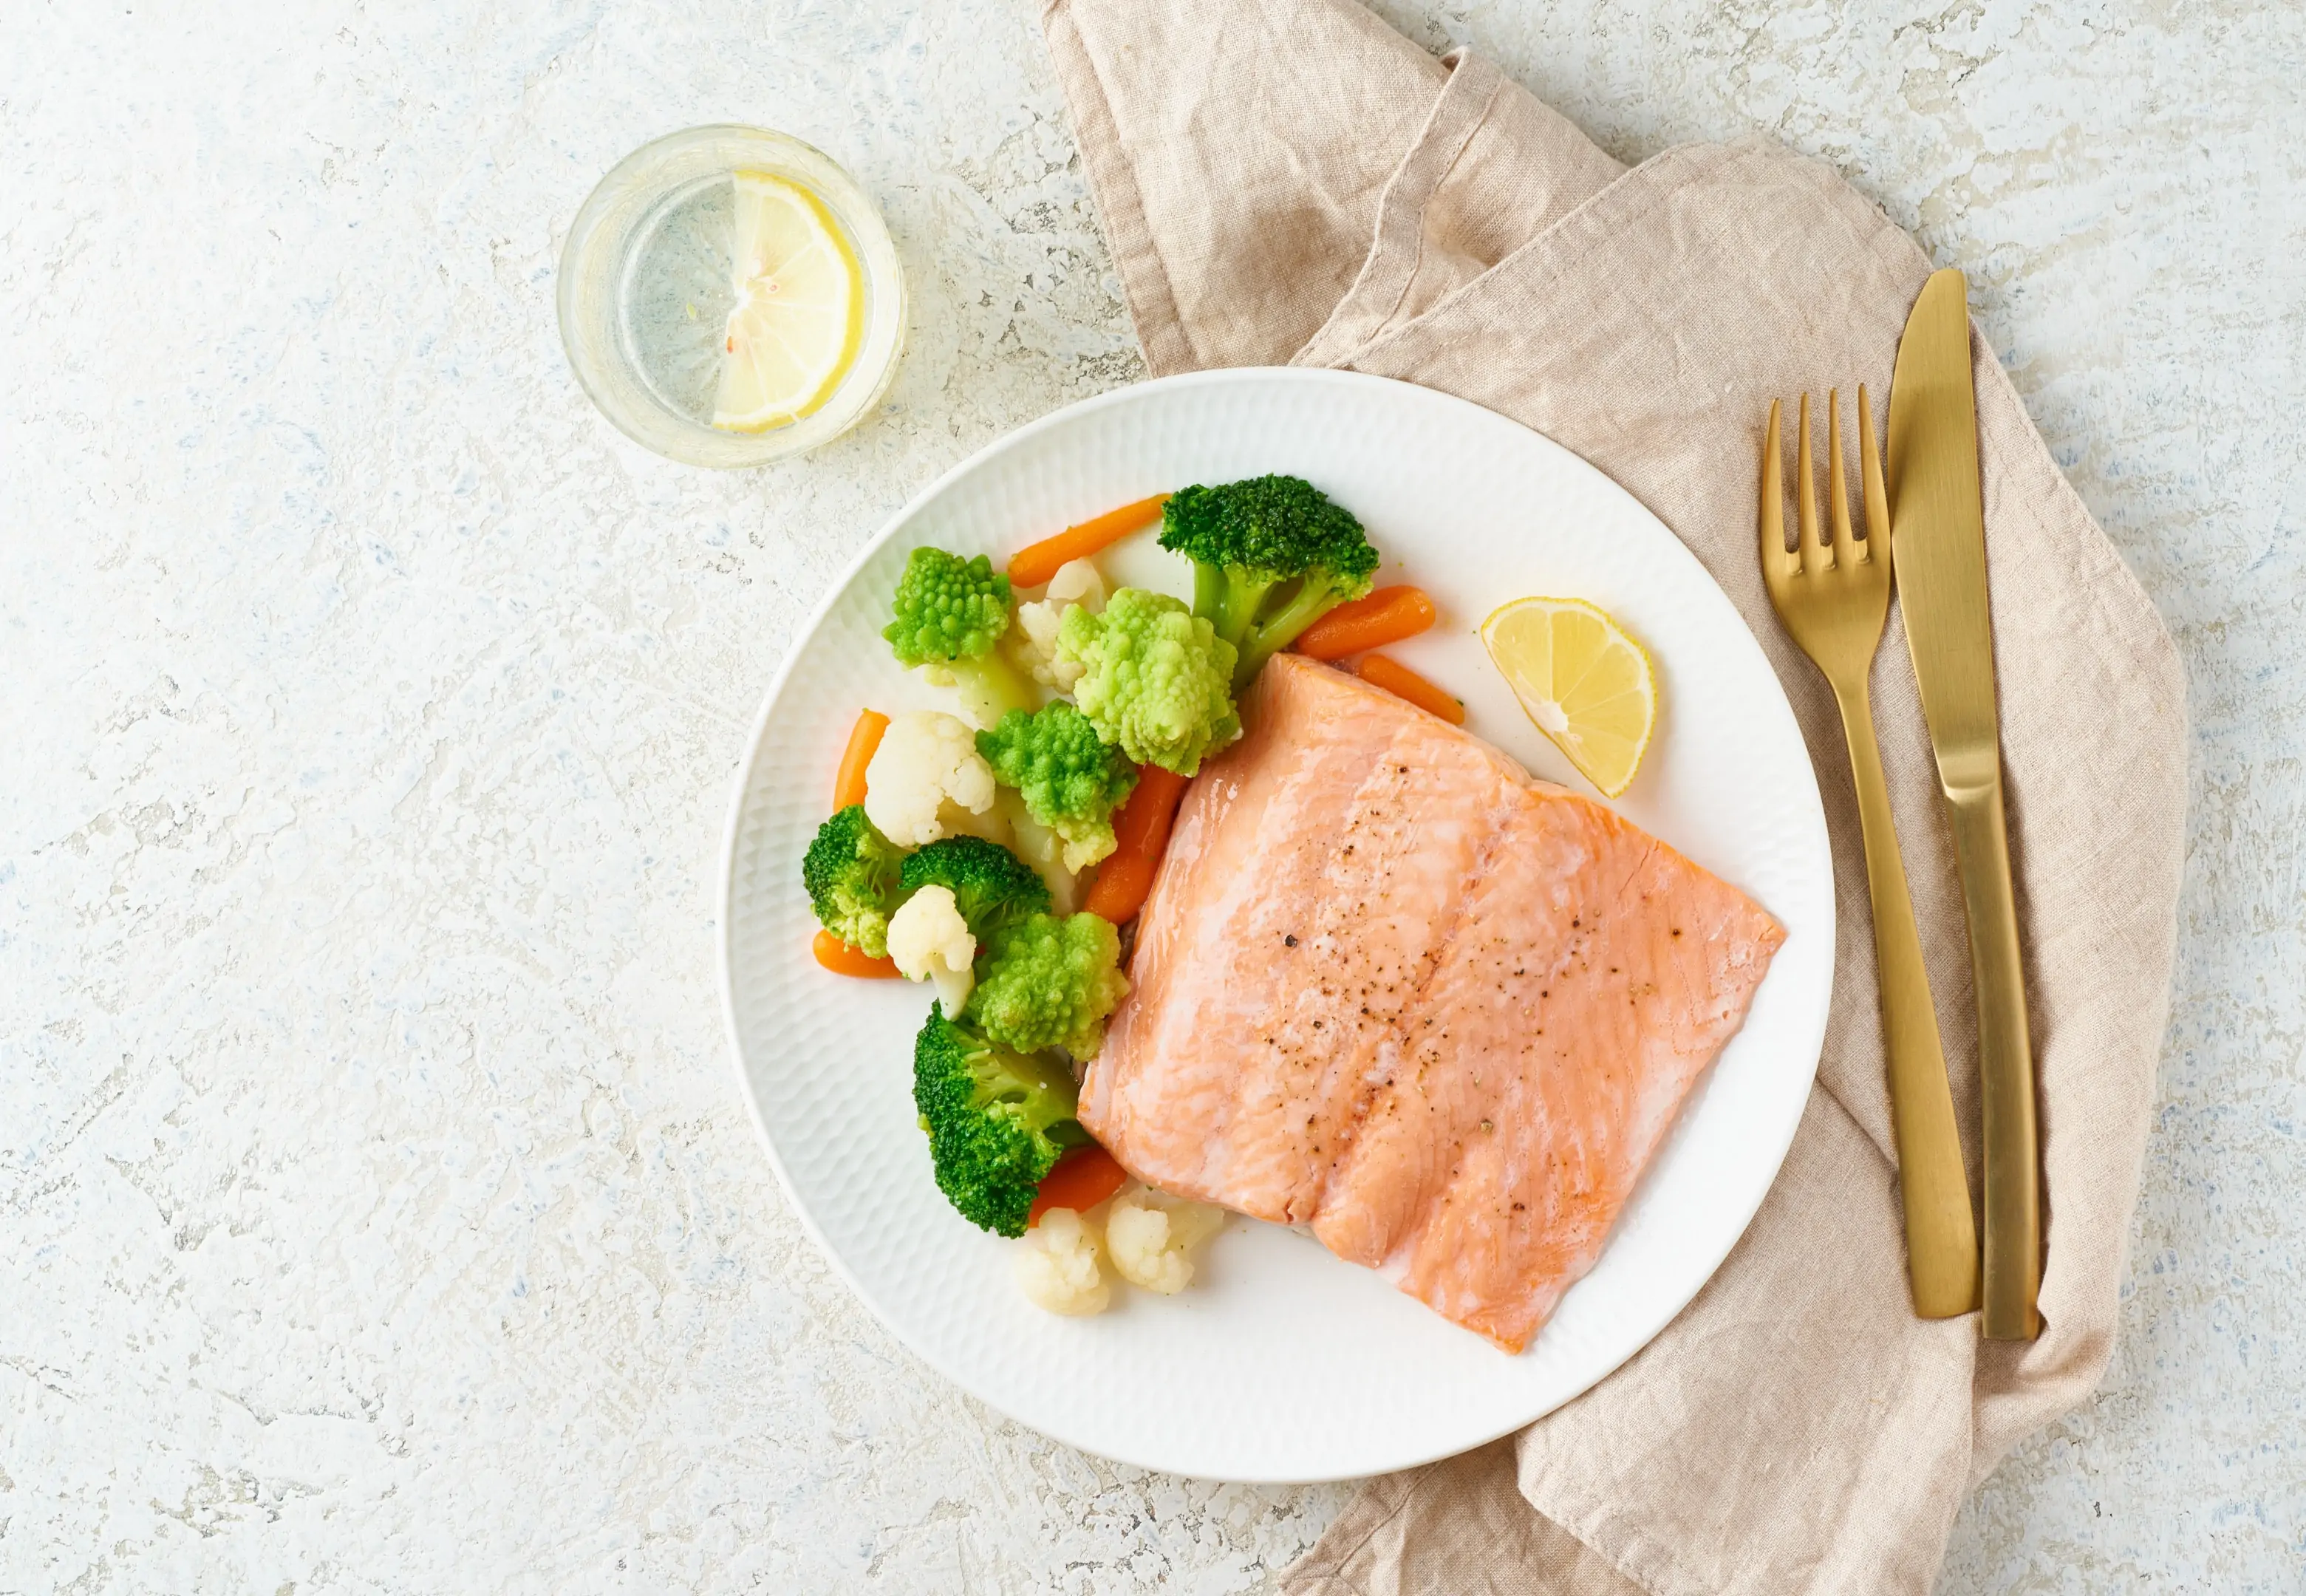 Steamed salmon with steamed broccoli, Romanesco and cauliflower